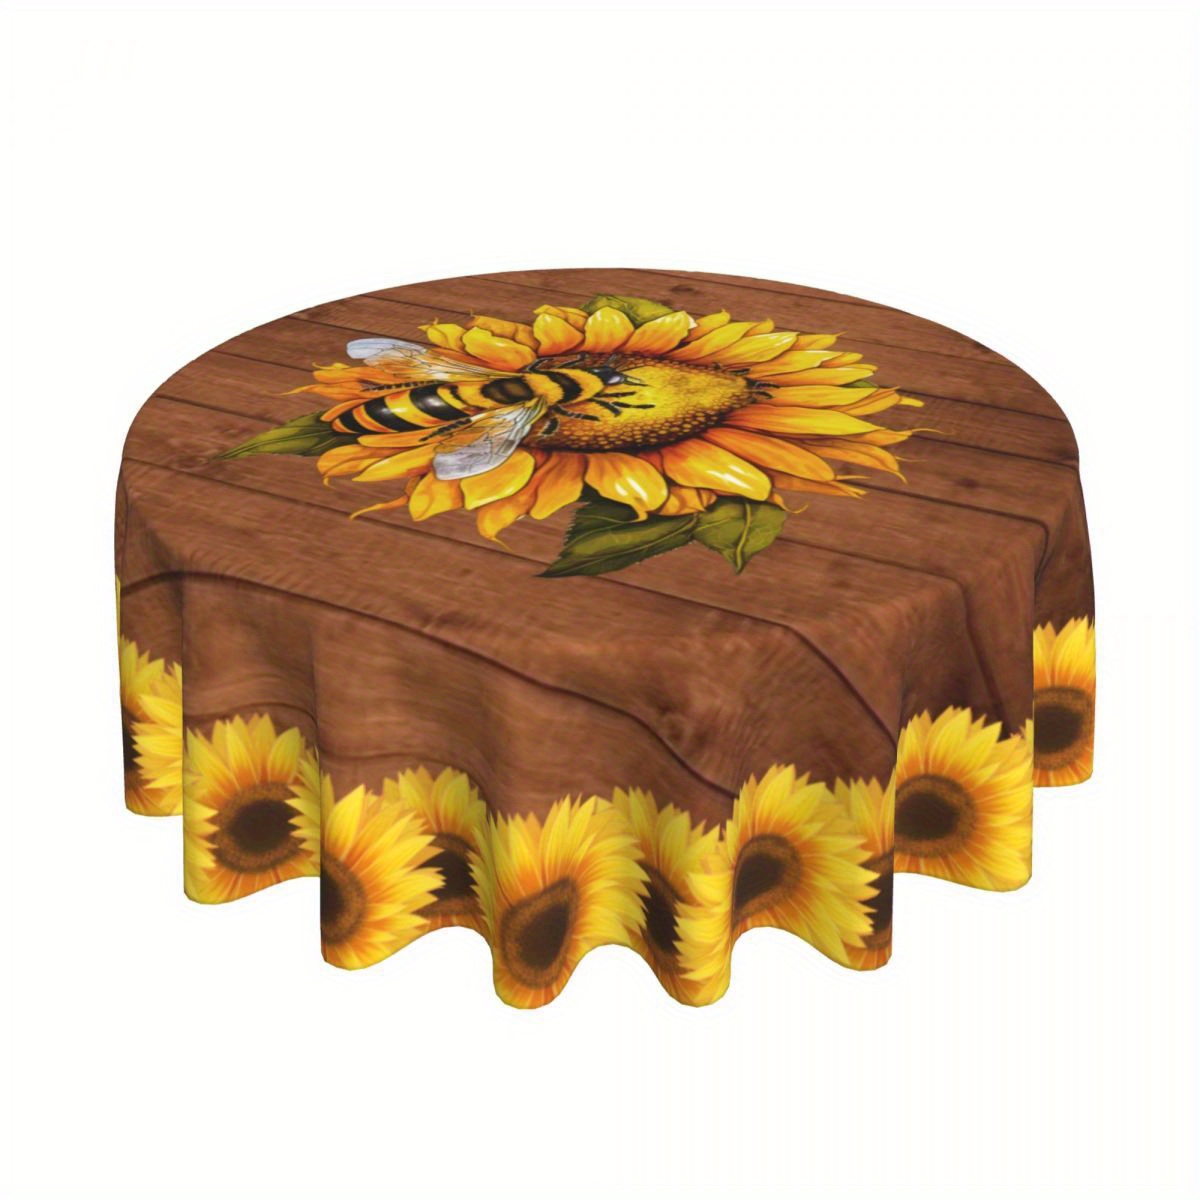 

Sunflower & Bee Print Round Tablecloth - 1pc 100% Polyester Woven Machine Made, Stain Resistant Washable Fine Fiber Table Cover For Kitchen Dining, Eid Ul Adha Holiday Party Decoration